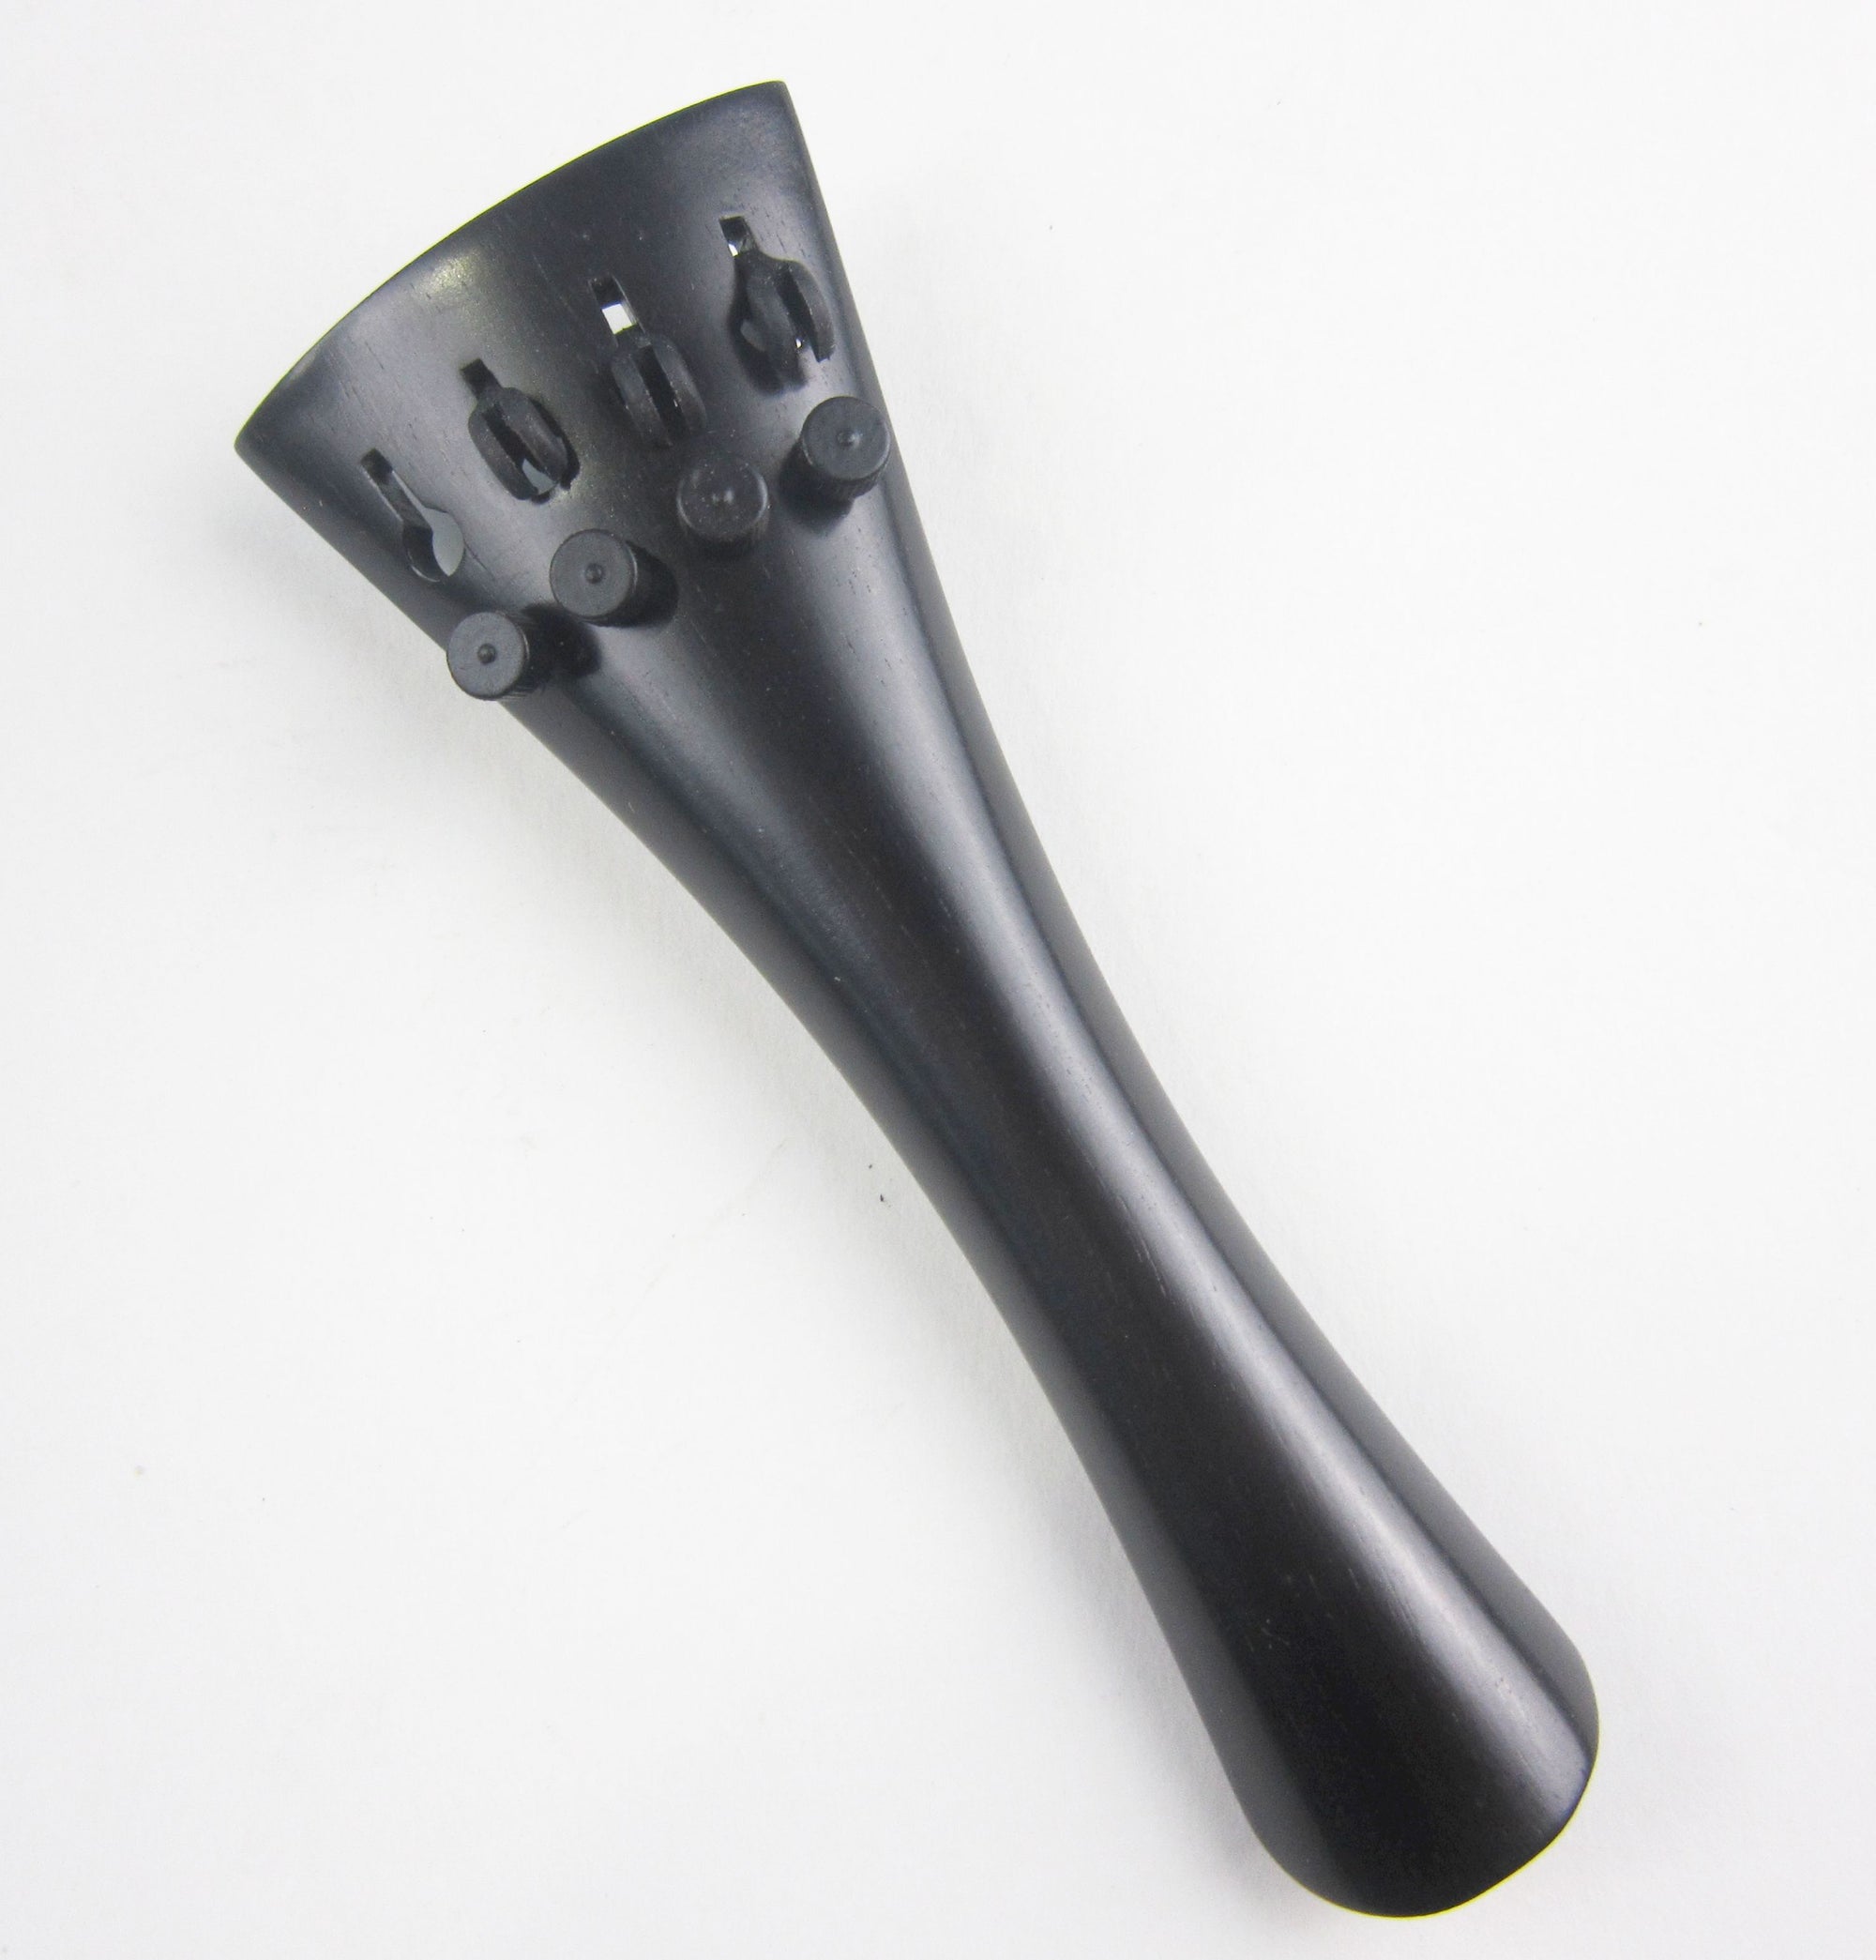 Violin tailpiece-French-Ebony-"Schmidt tailpiece"-4 tuners-no saddle-114mm